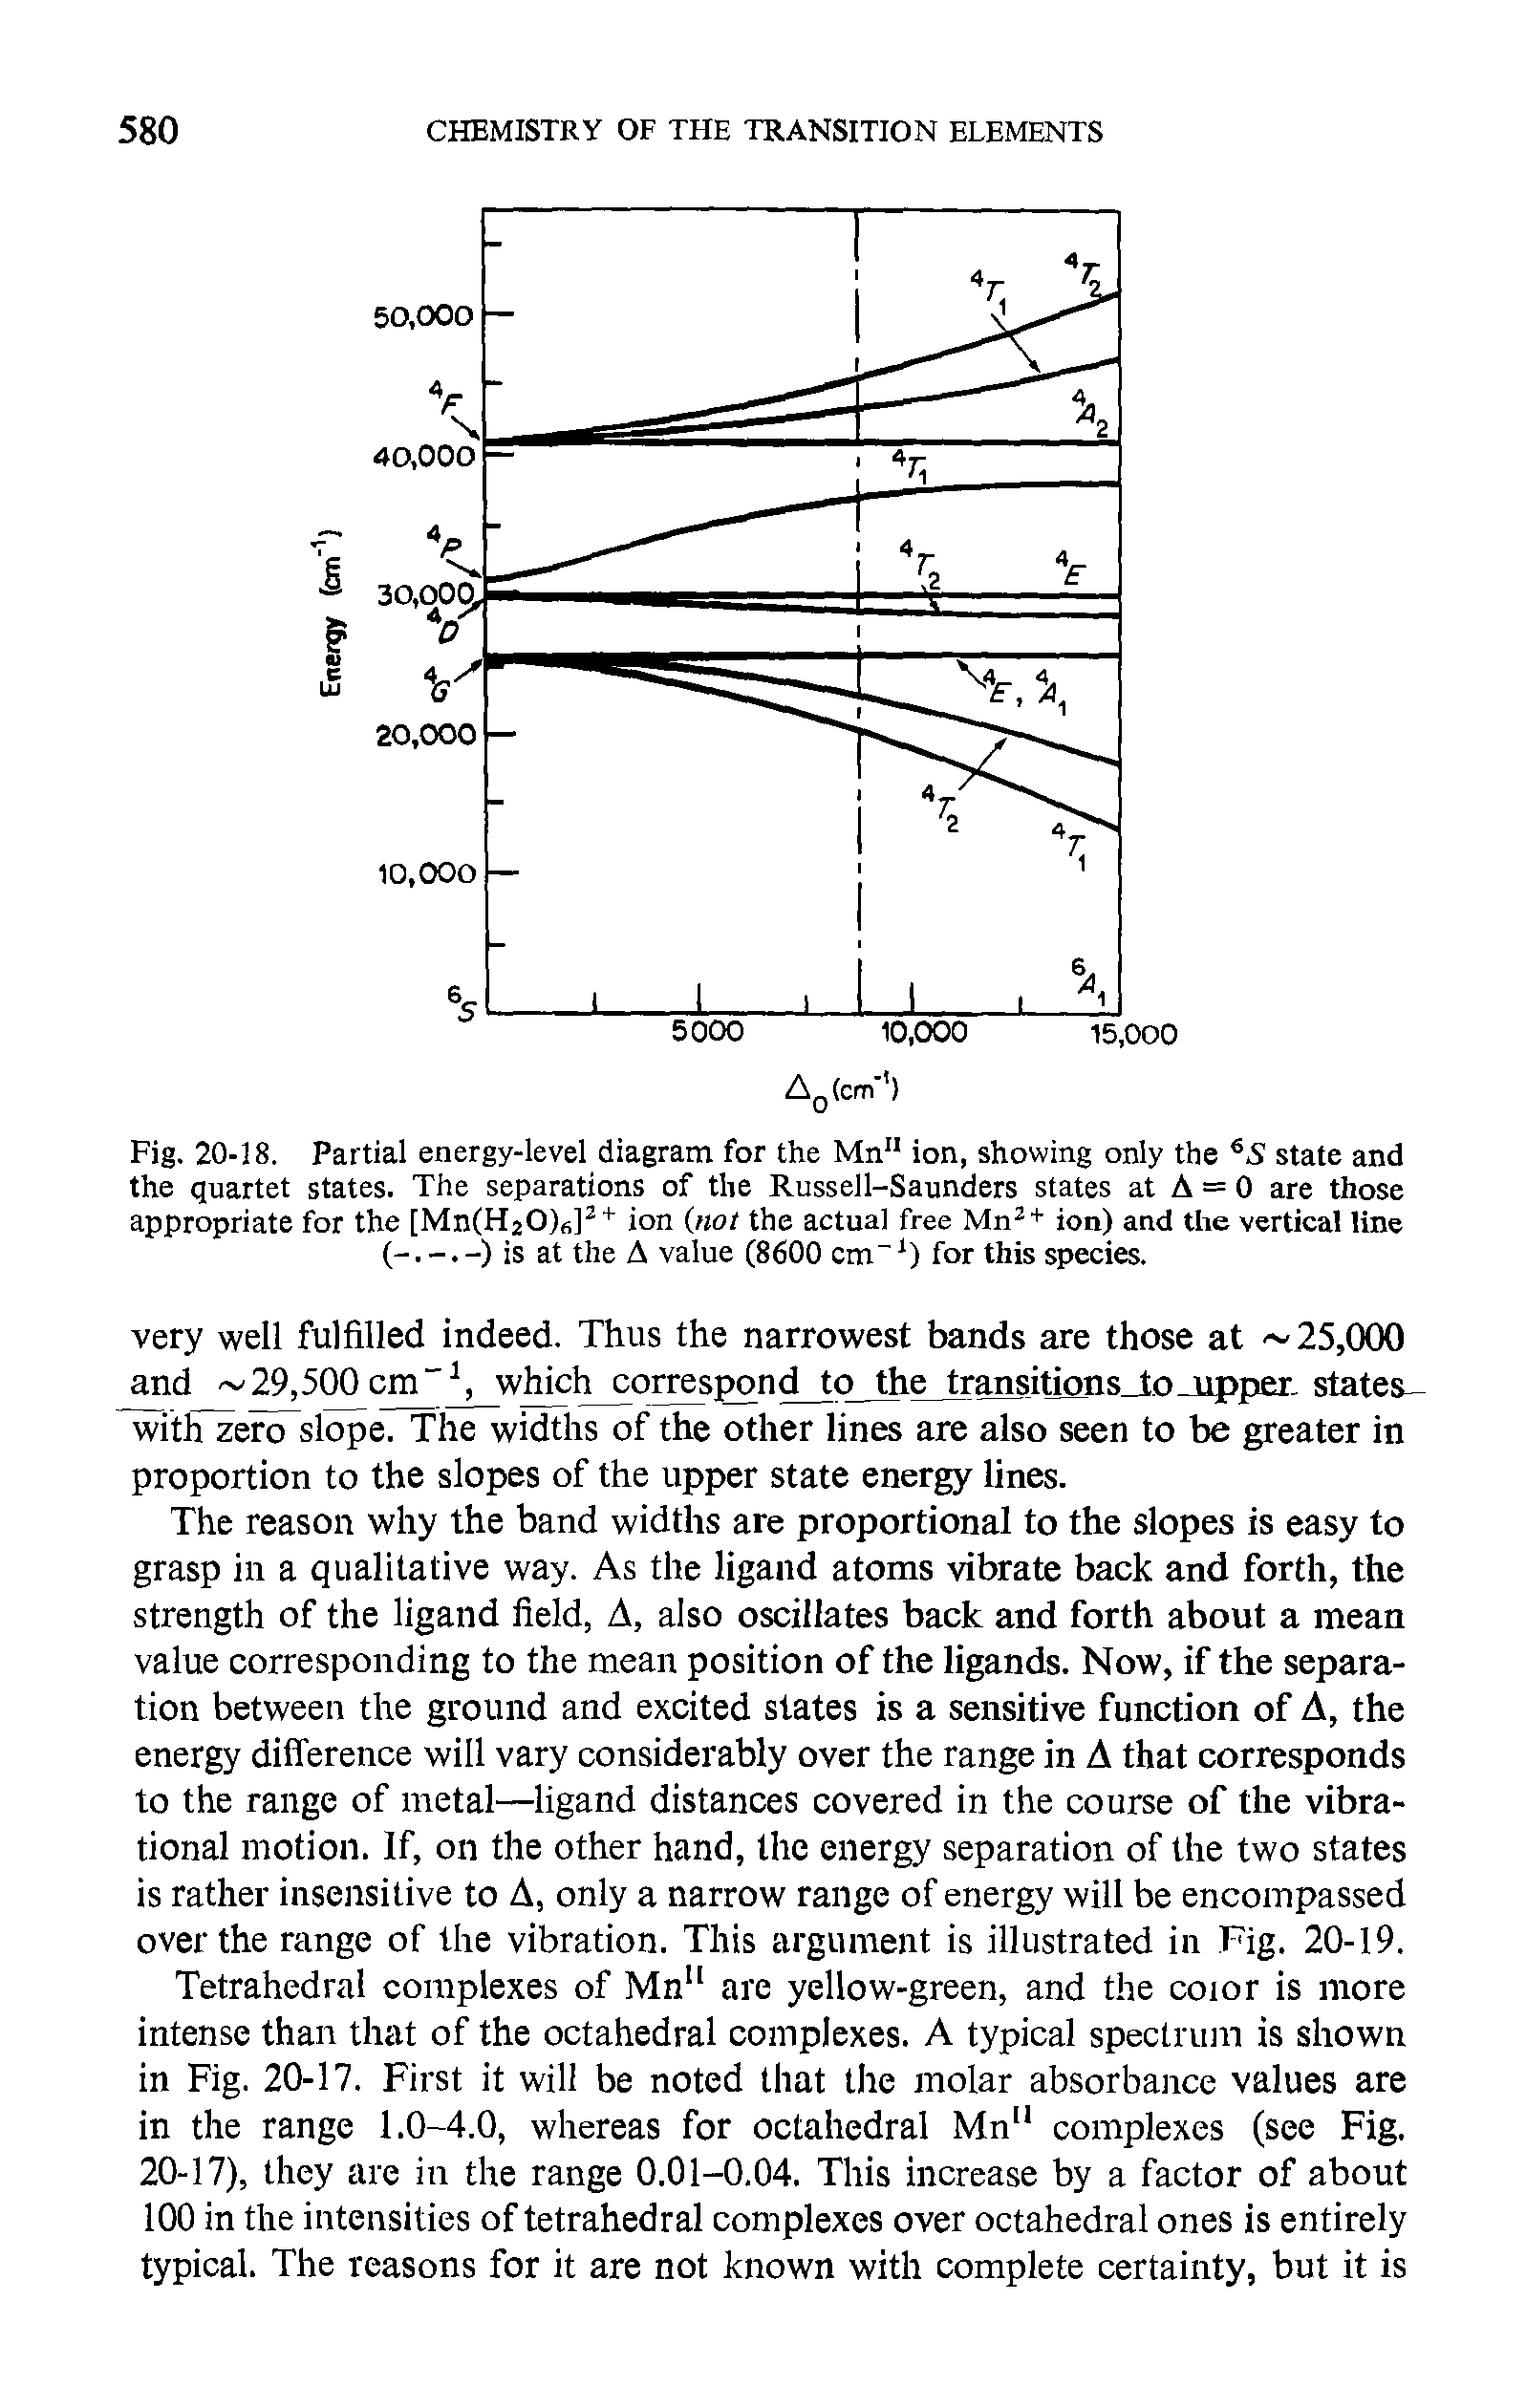 Fig. 20-18. Partial energy-level diagram for the Mn" ion, showing only the 6.S state and the quartet states. The separations of the Russell-Saunders states at A = 0 are those appropriate for the [Mn(H20)6]2+ ion (not the actual free Mn2+ ion) and the vertical line is at the A value (8600 cm-1) for this species.